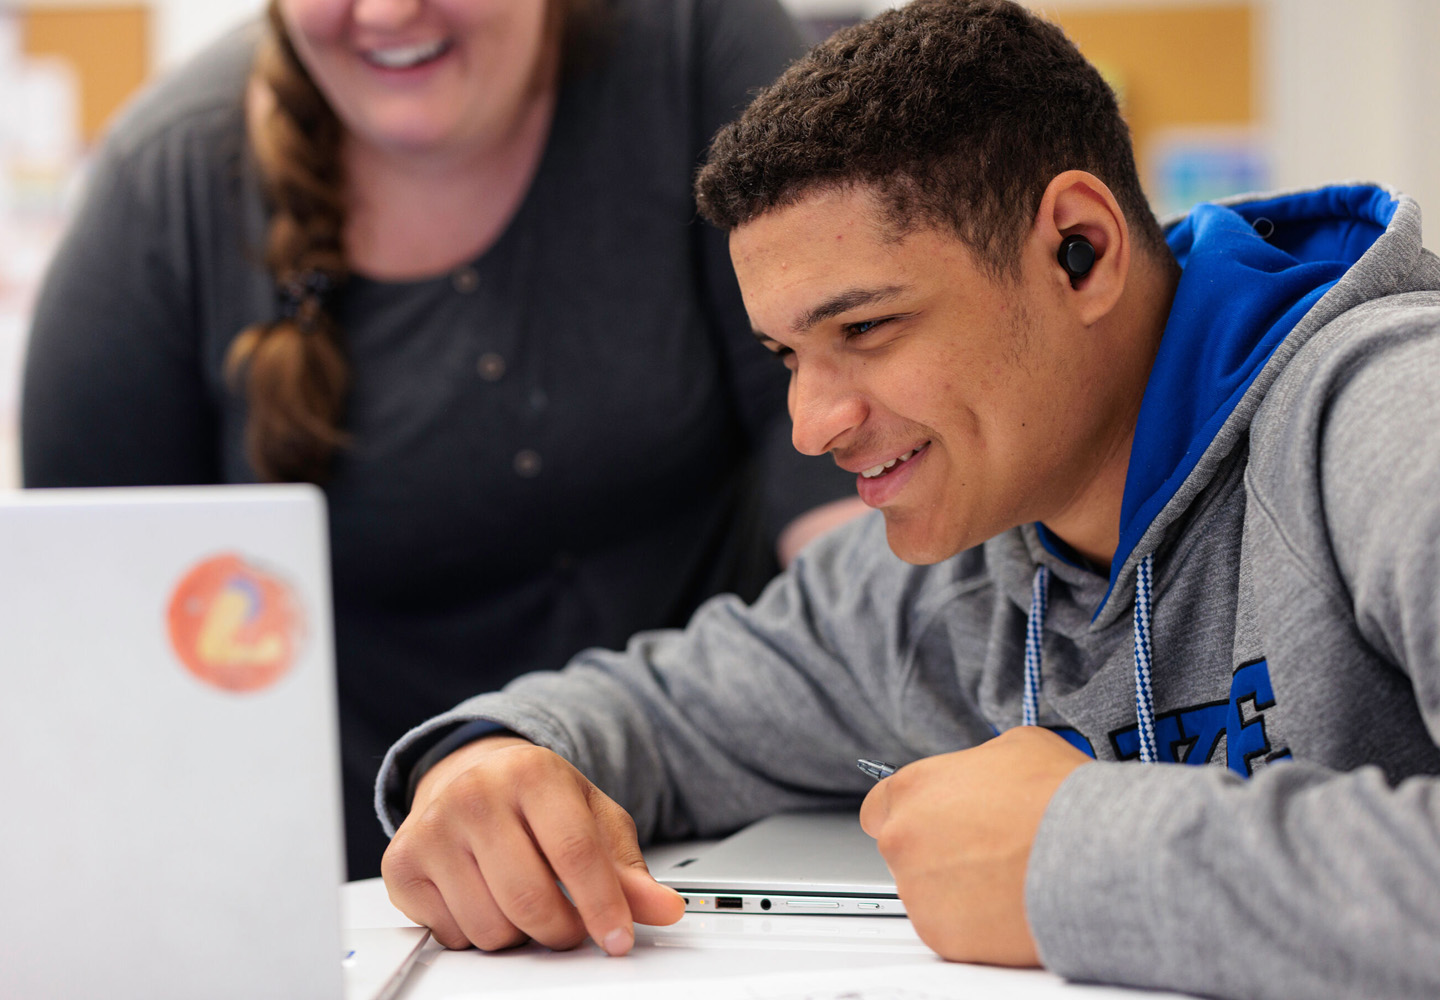 A student smiles as he looks at a laptop in front of him, with a teacher smiling in the background